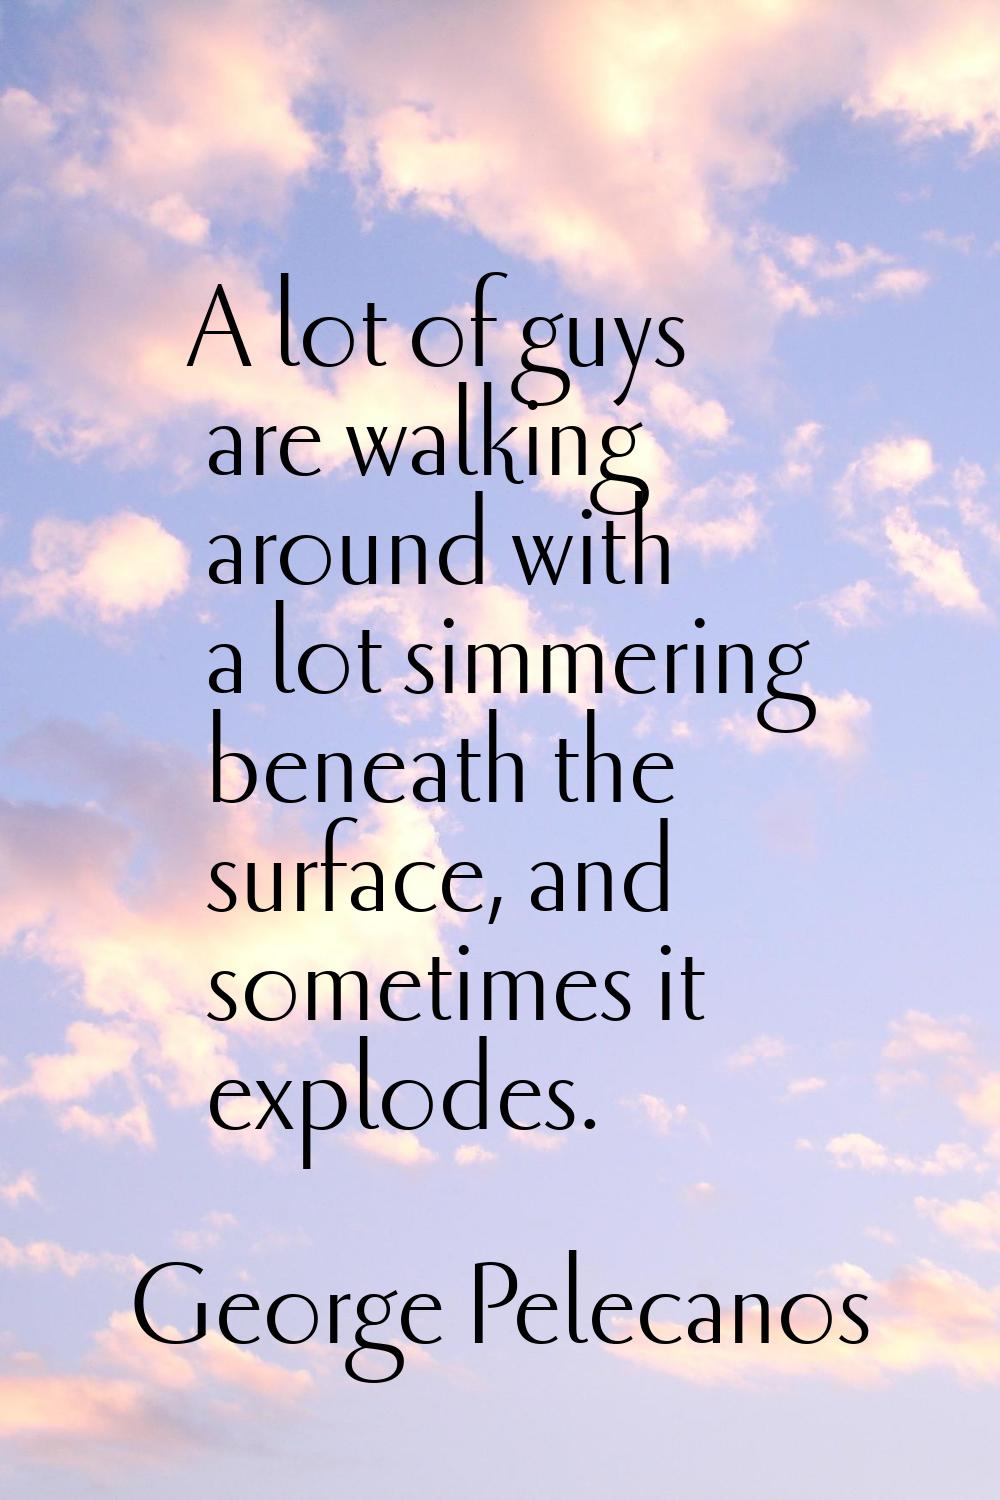 A lot of guys are walking around with a lot simmering beneath the surface, and sometimes it explode